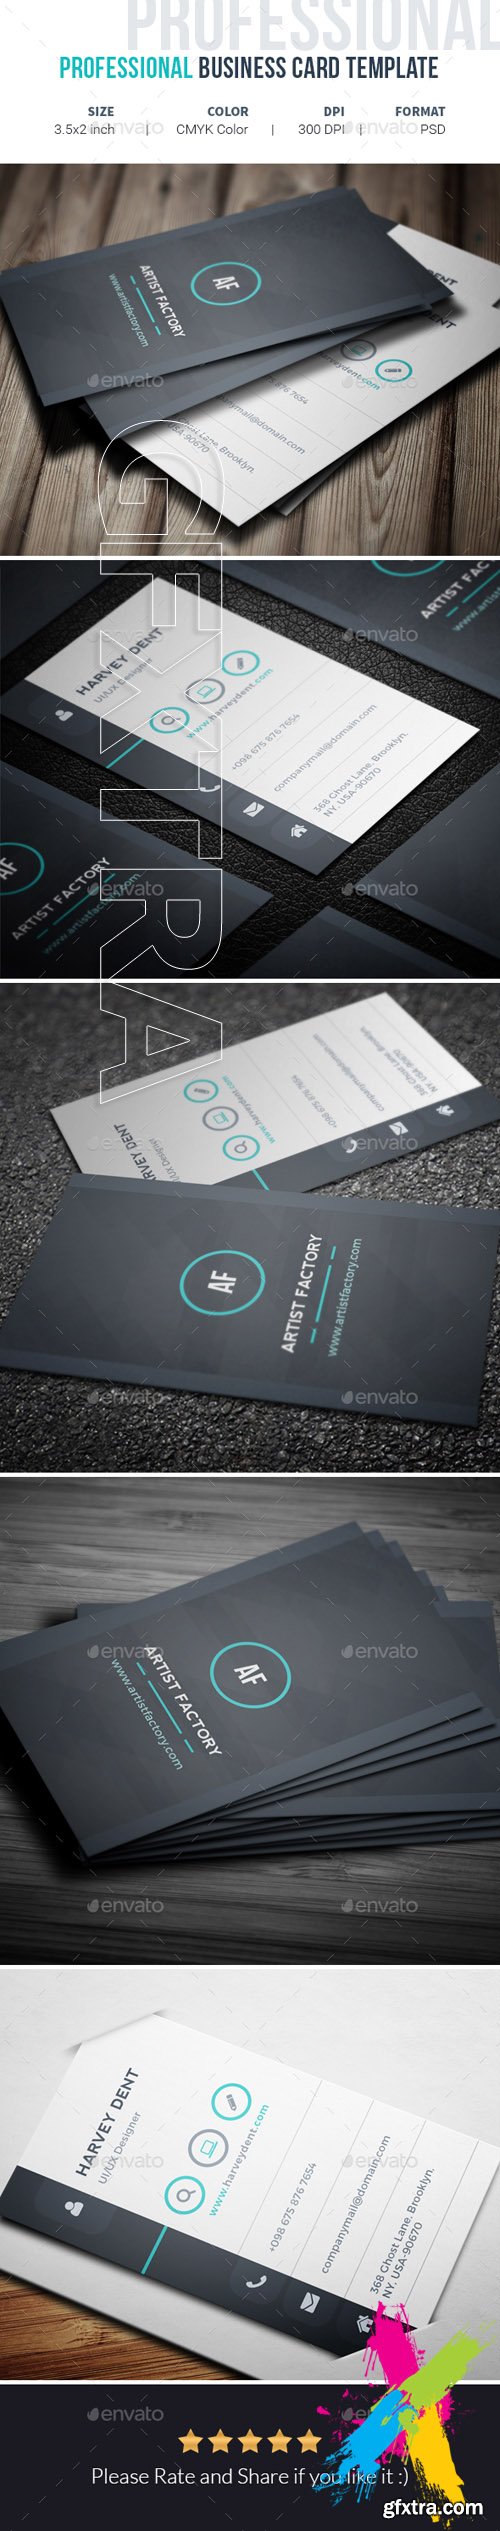 GR - Professional Business Card Template 19975465